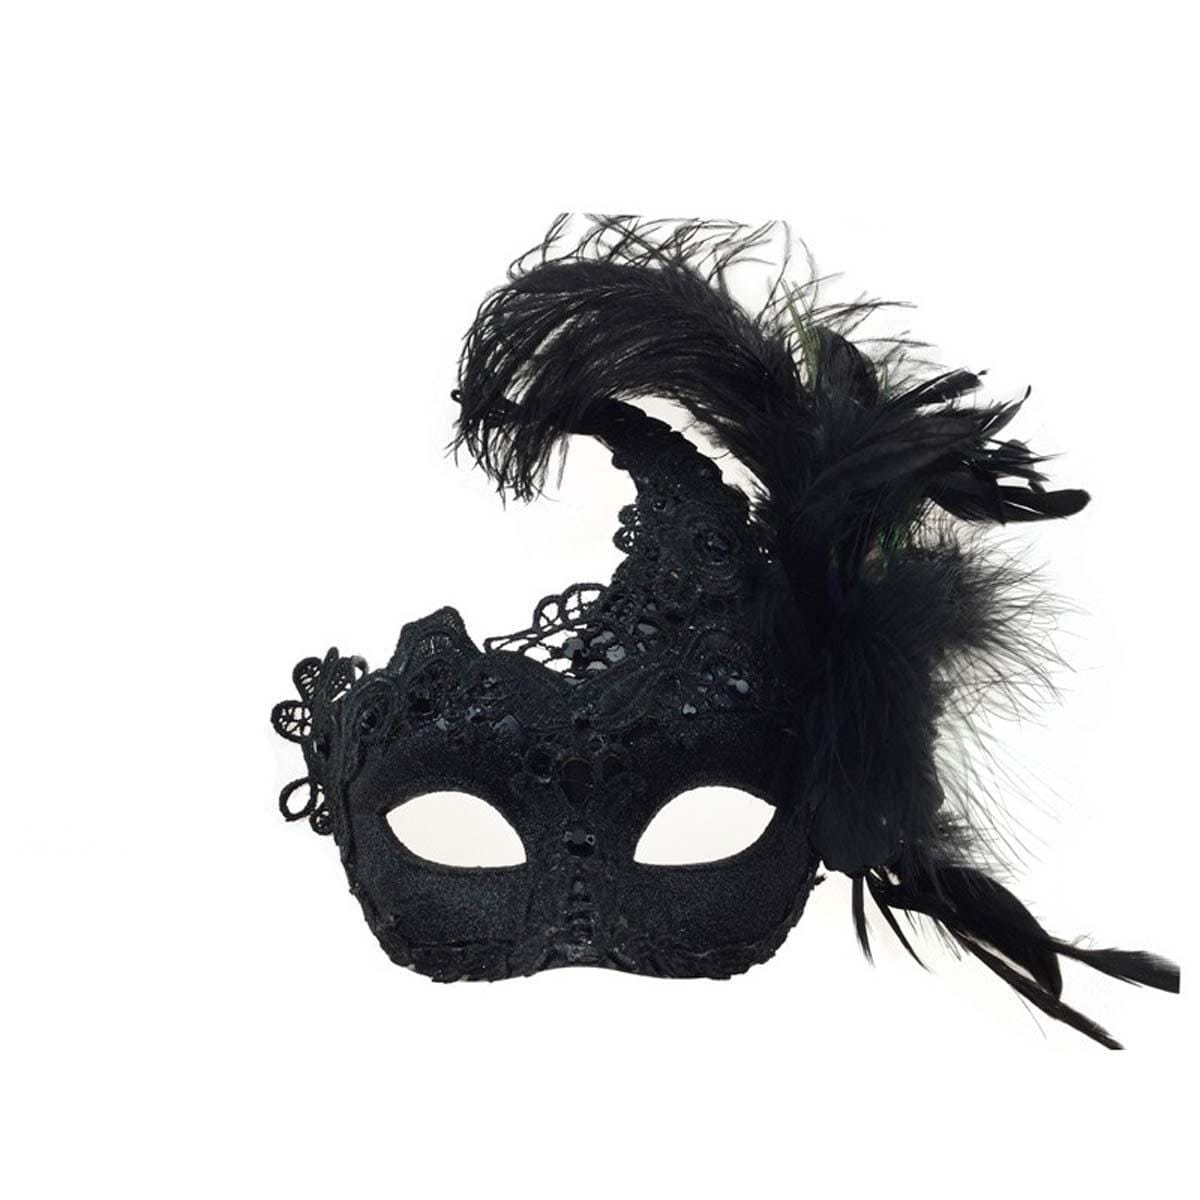 Buy Costume Accessories Black venetian mask with feathers and brocade lace sold at Party Expert